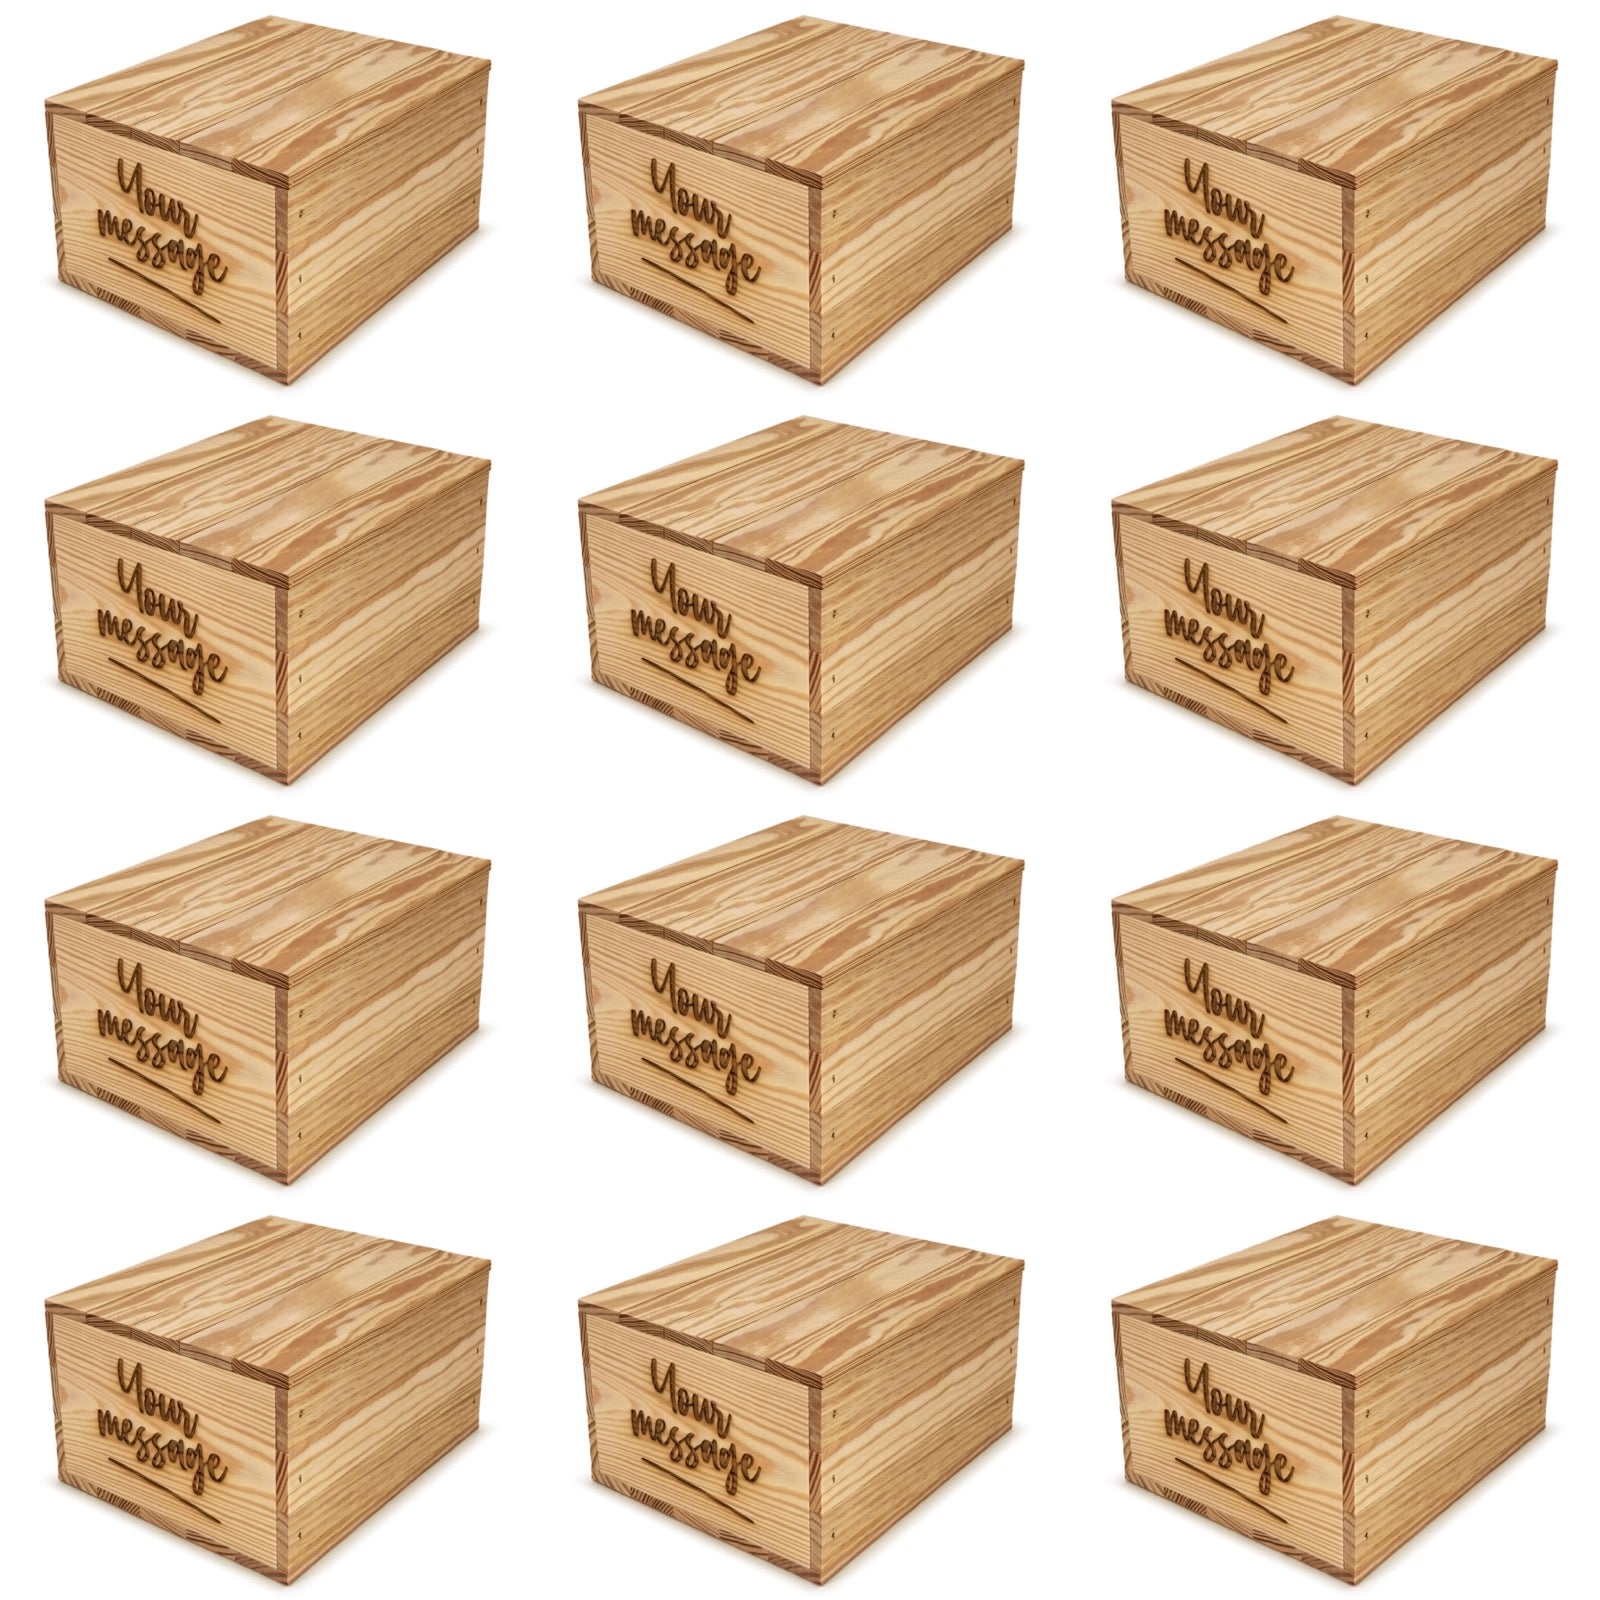 12 small wooden crates with lid and custom message on the end 9x8x5.25